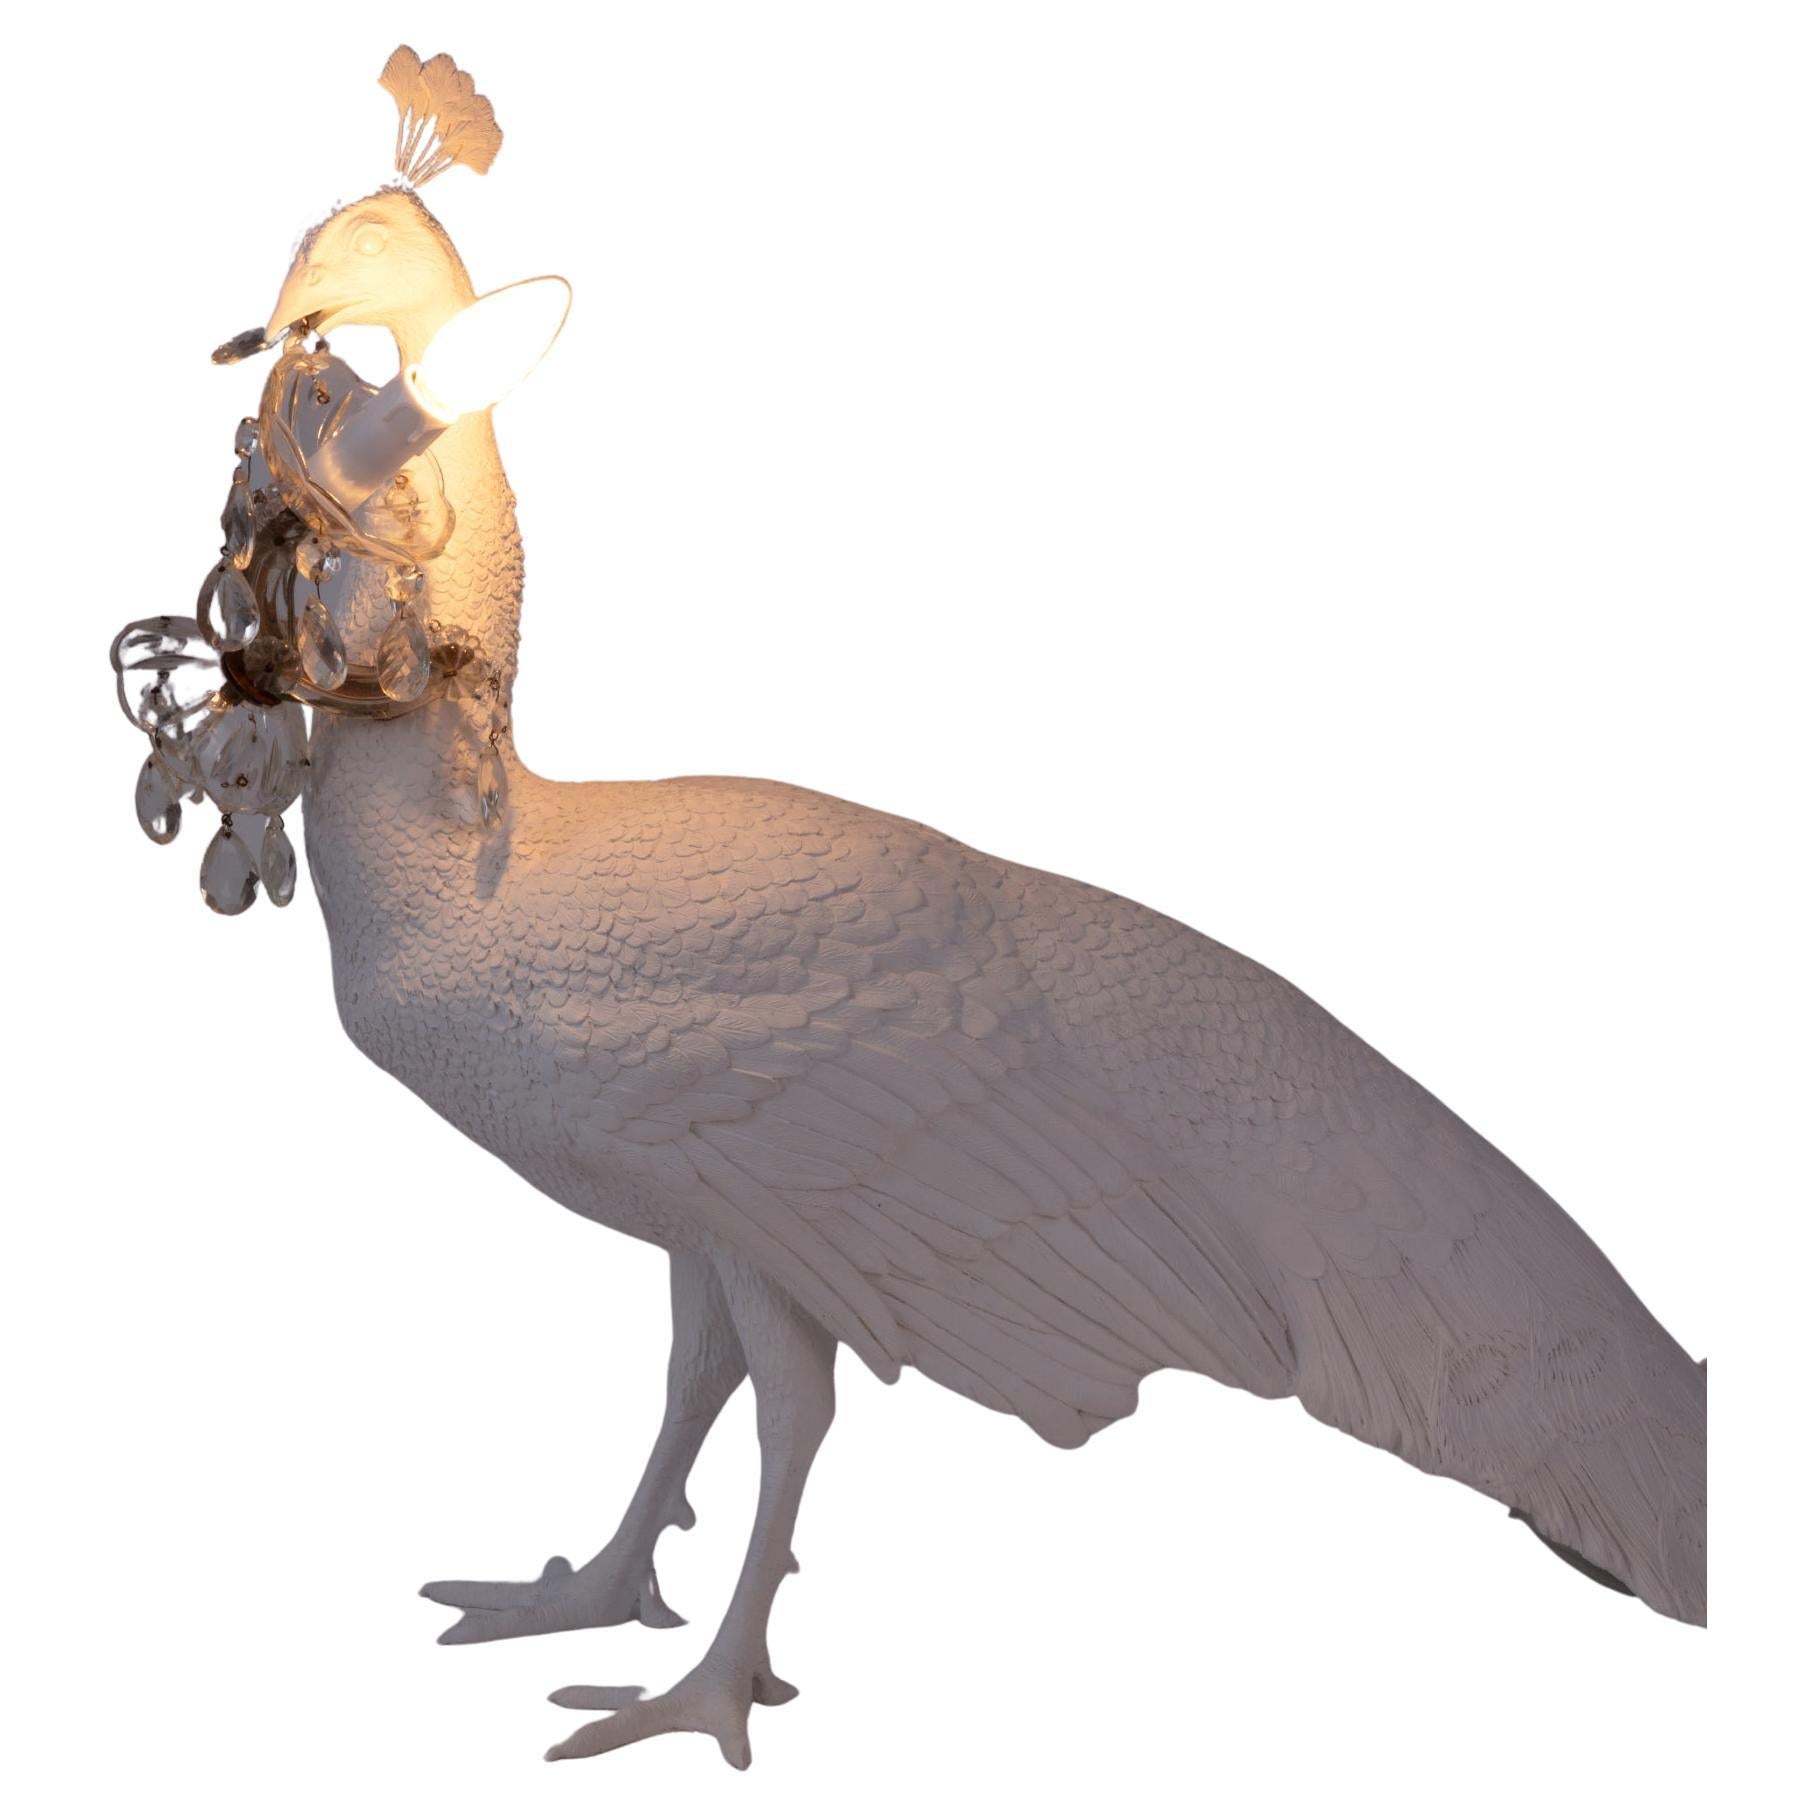 The Peacock Lamp is another amazing sculpture by Marcantonio that gives any space an edge with a bit of life. It decorates your interior with fun and adds character to a space in the form of one of the world's most exotic birds.